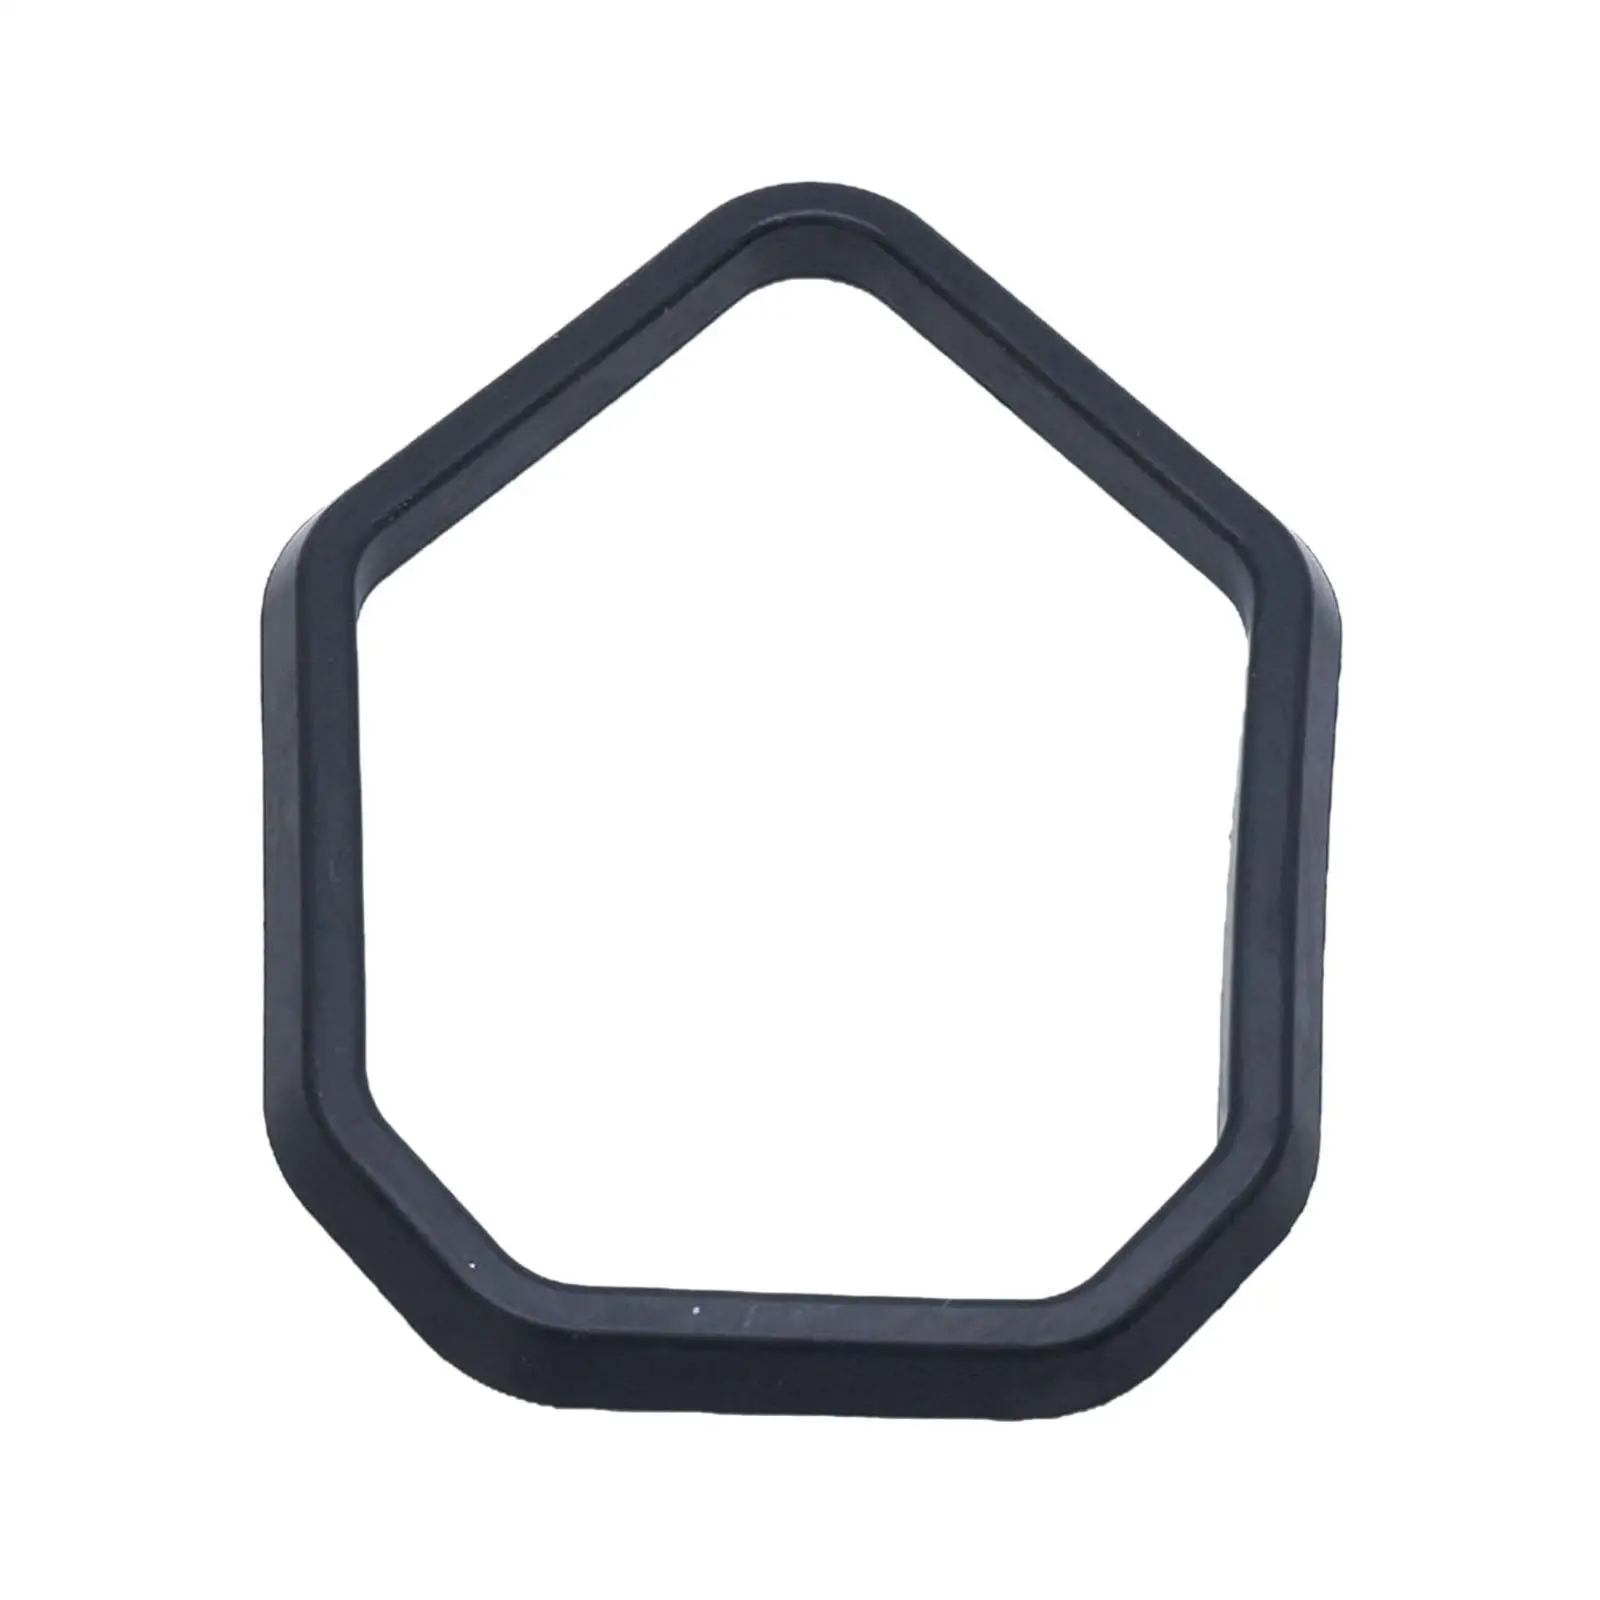 

6E5-45123 New Gasket Fits for Outboard Motor 115HP To 250HP